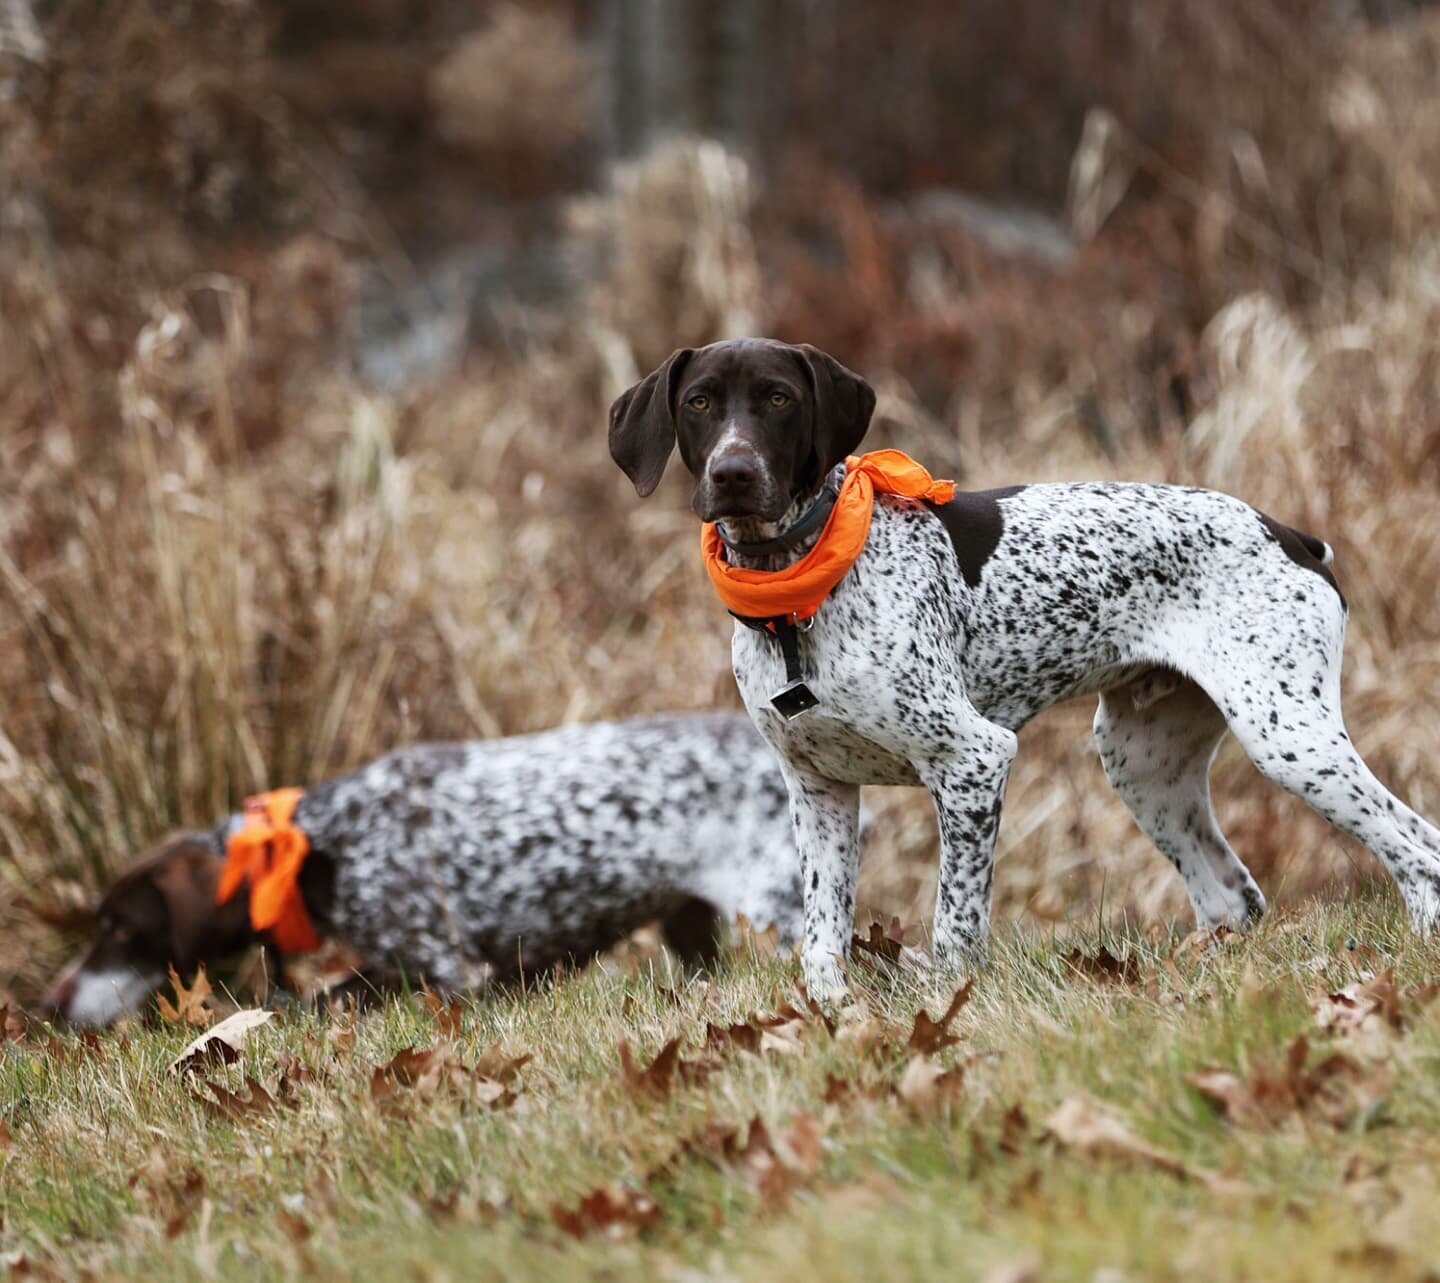 Hunting season. Dress appropriately. #shootcamerasnotguns #hikesafe #ringneckpheasant #birddogs

Also, at 6mths, Owen is already looking more dog and less puppy.